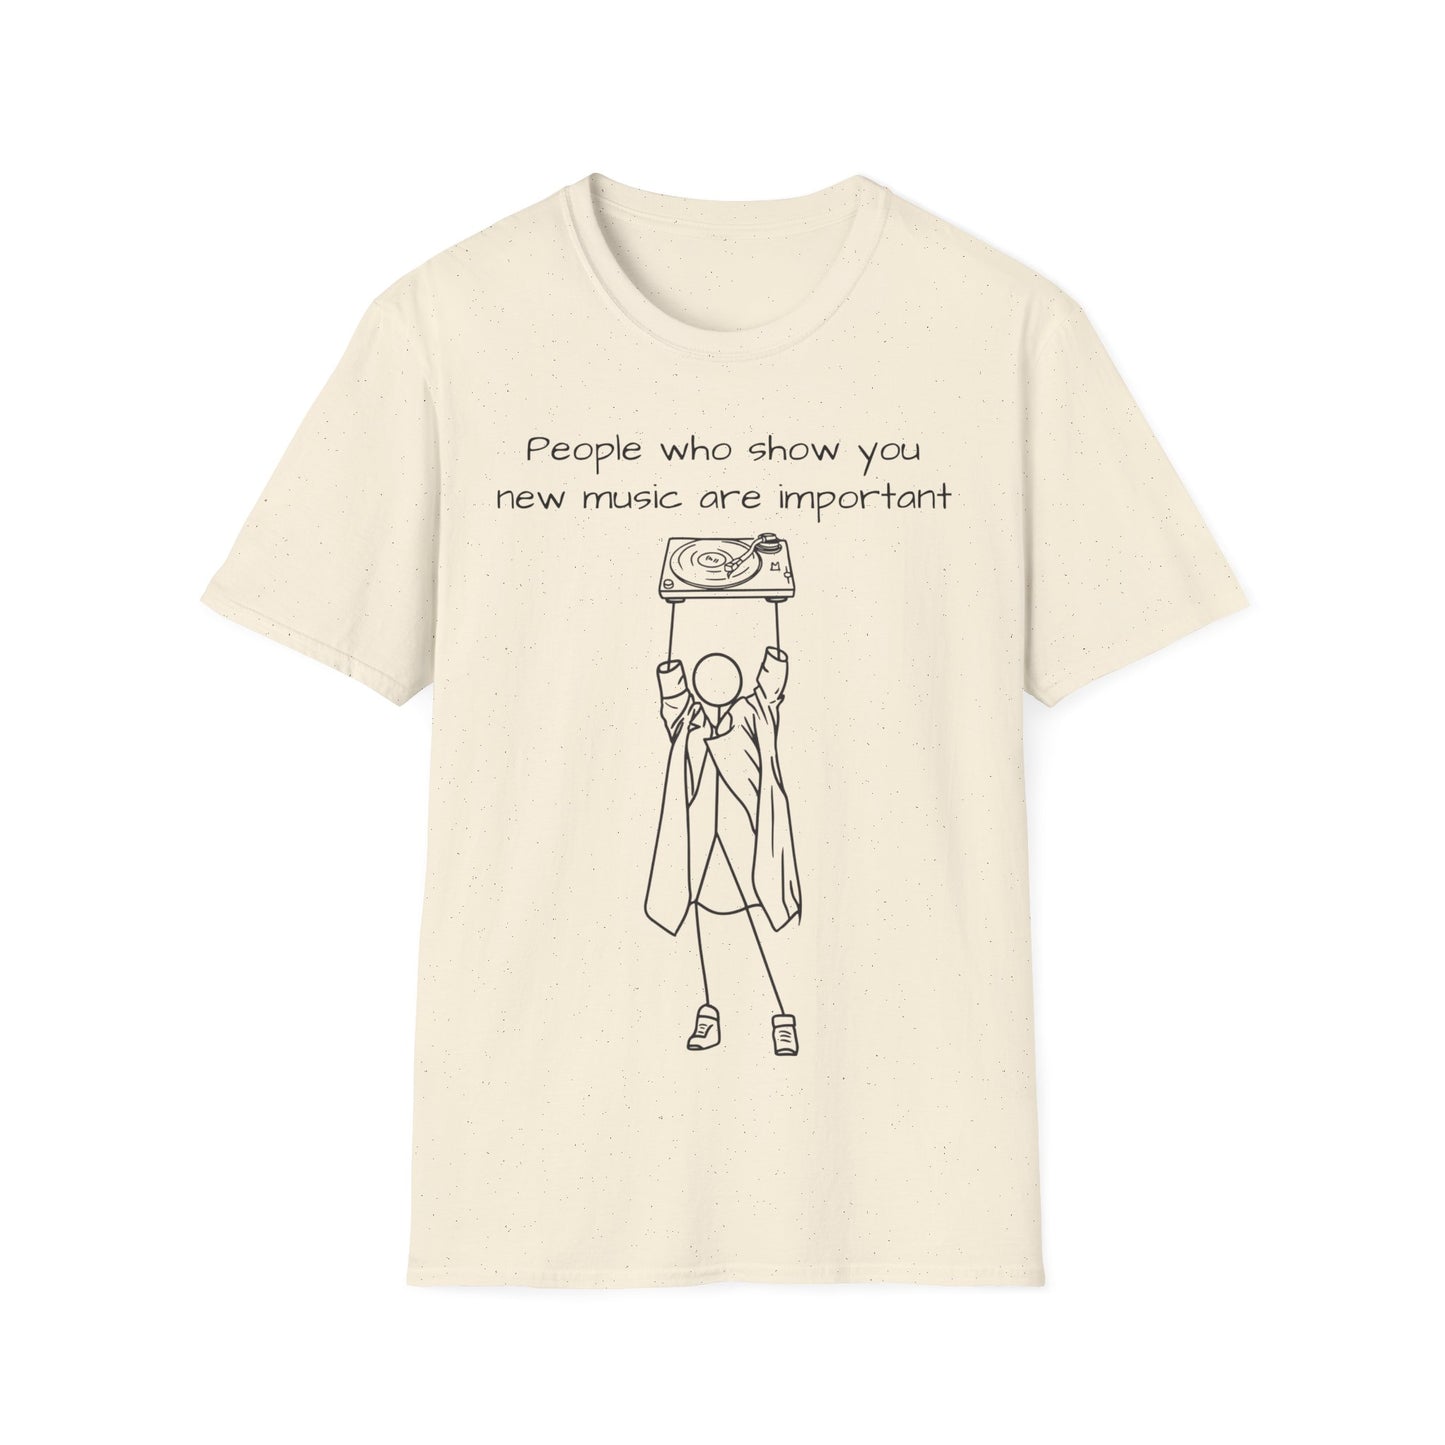 A Vinyl Record T-Shirt New Music Is Important Lloyd Dobbler Say Anything Stickman